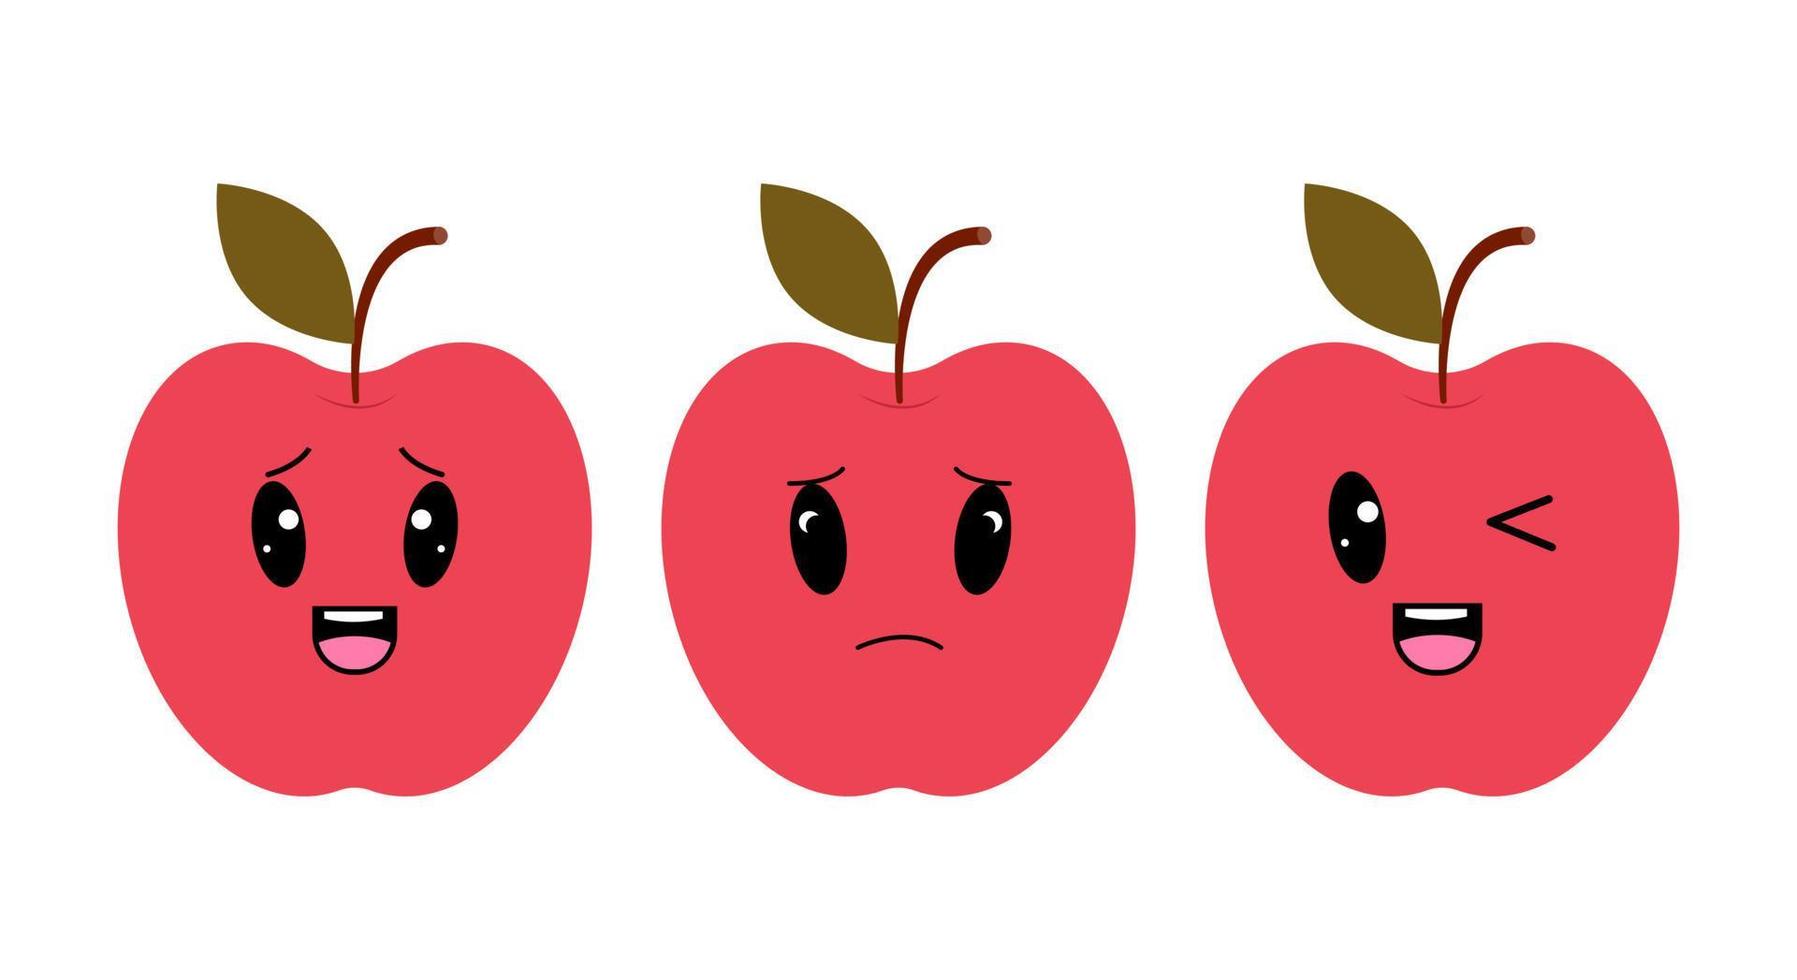 Red apple with kawaii eyes. Flat design vector illustration of red apple